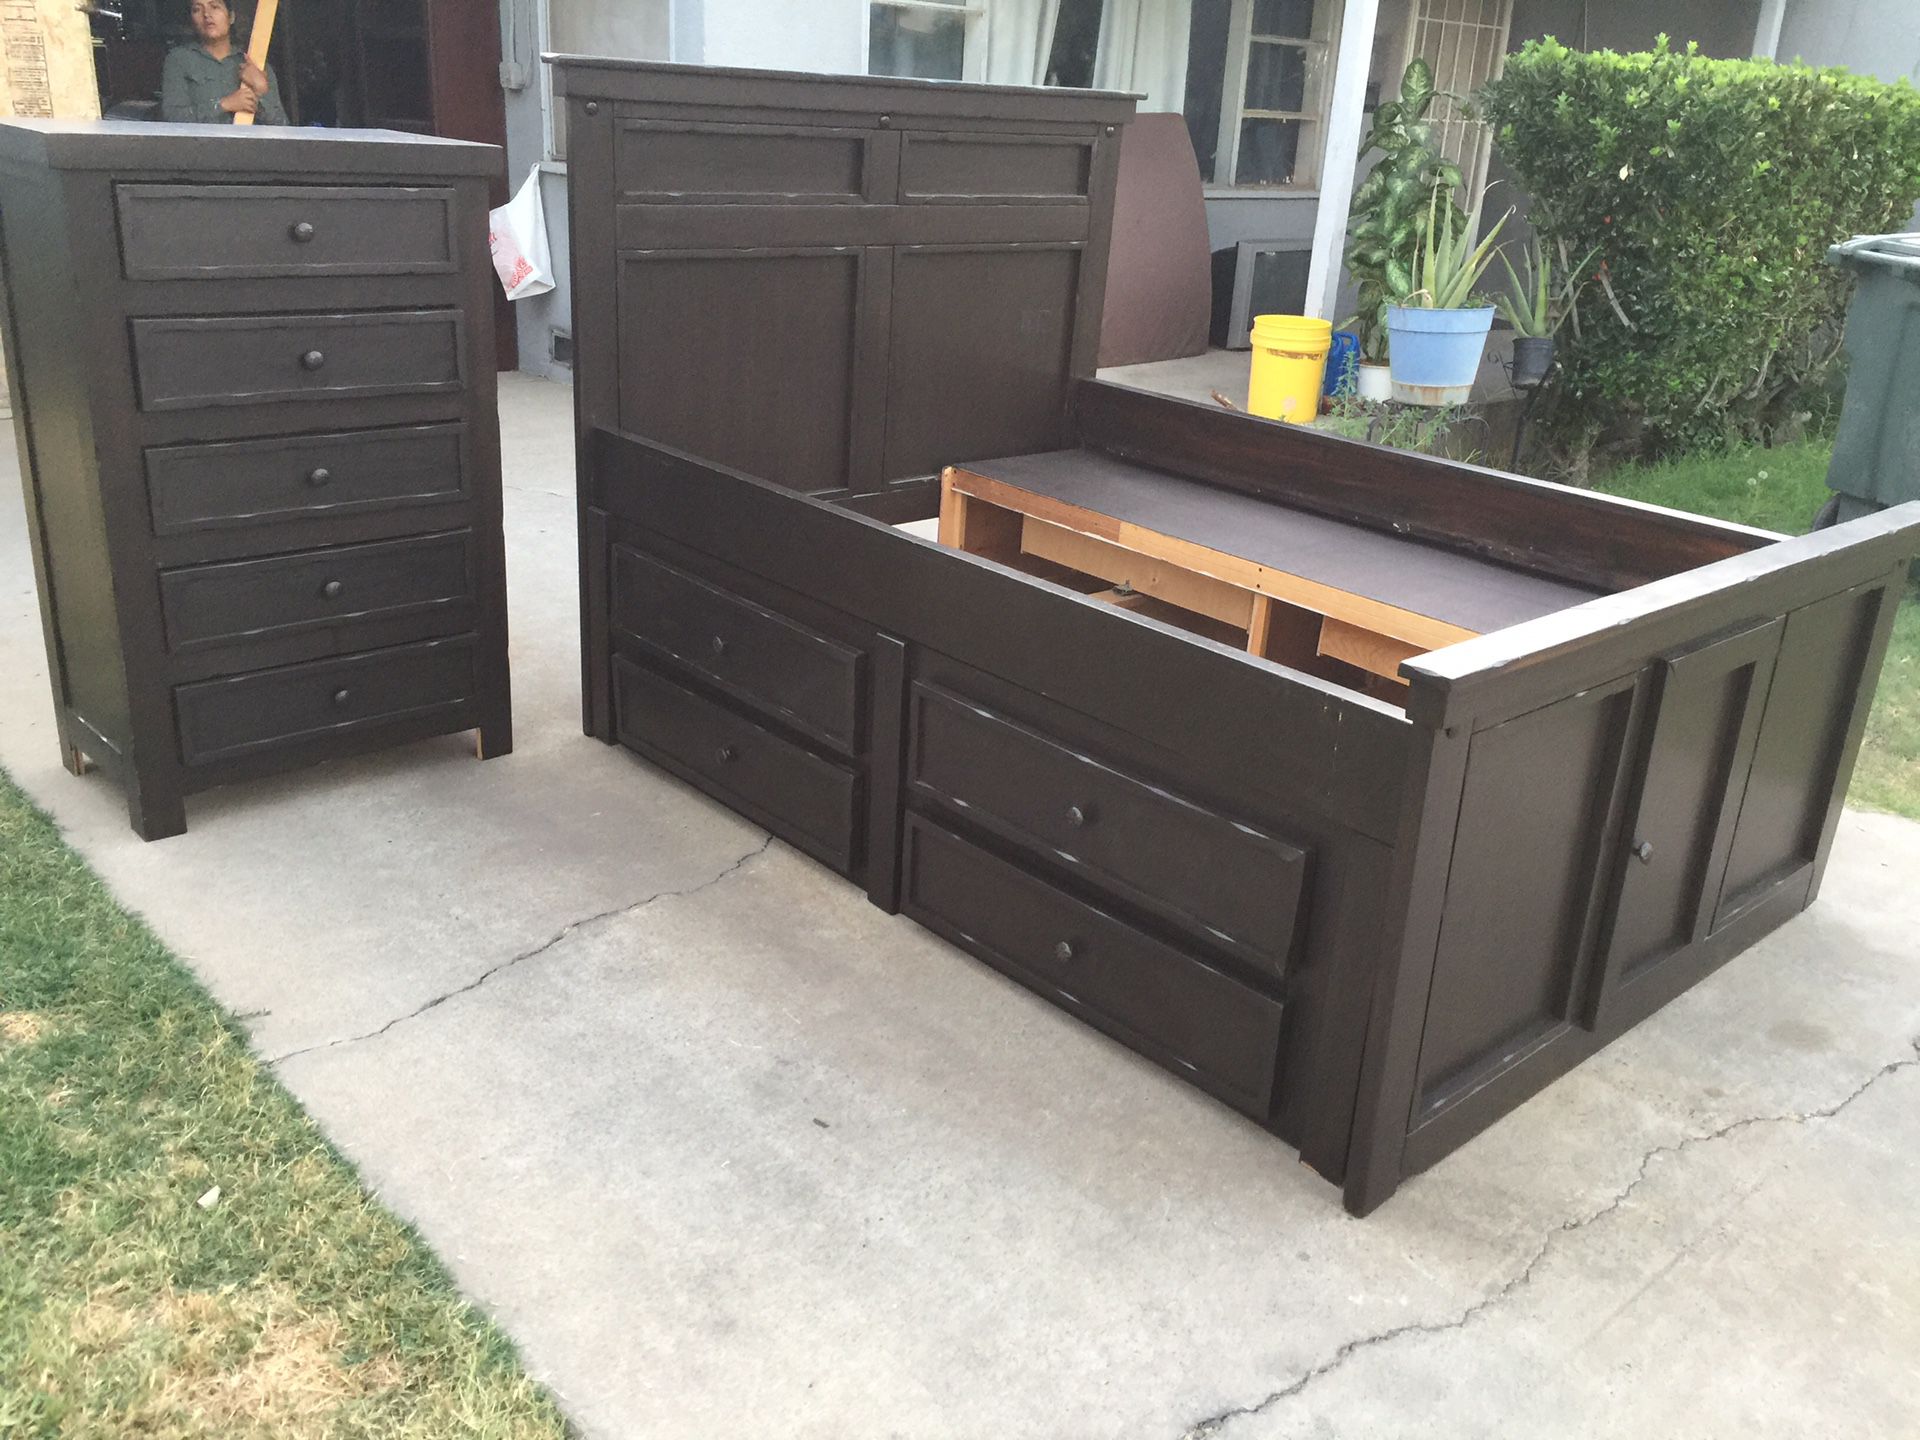 Full bed frame with double storage and eight drawers and one tall dresser with five drawers all drawers open fine.